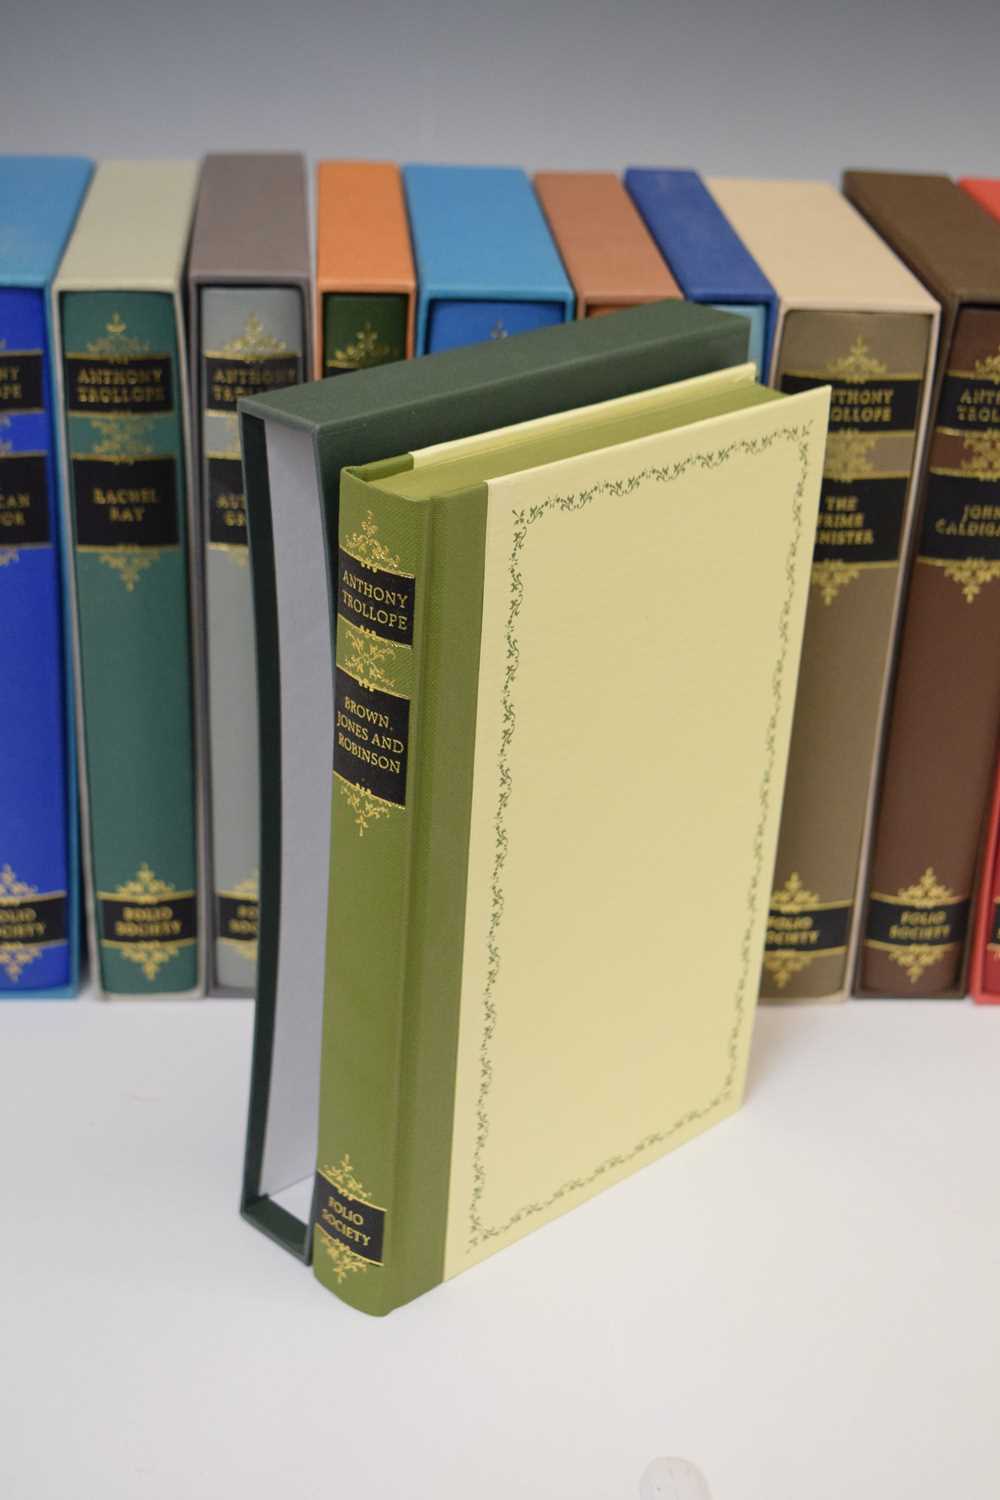 Twelve books by Anthony Trollope, Folio Society editions in slipcases - Image 6 of 8